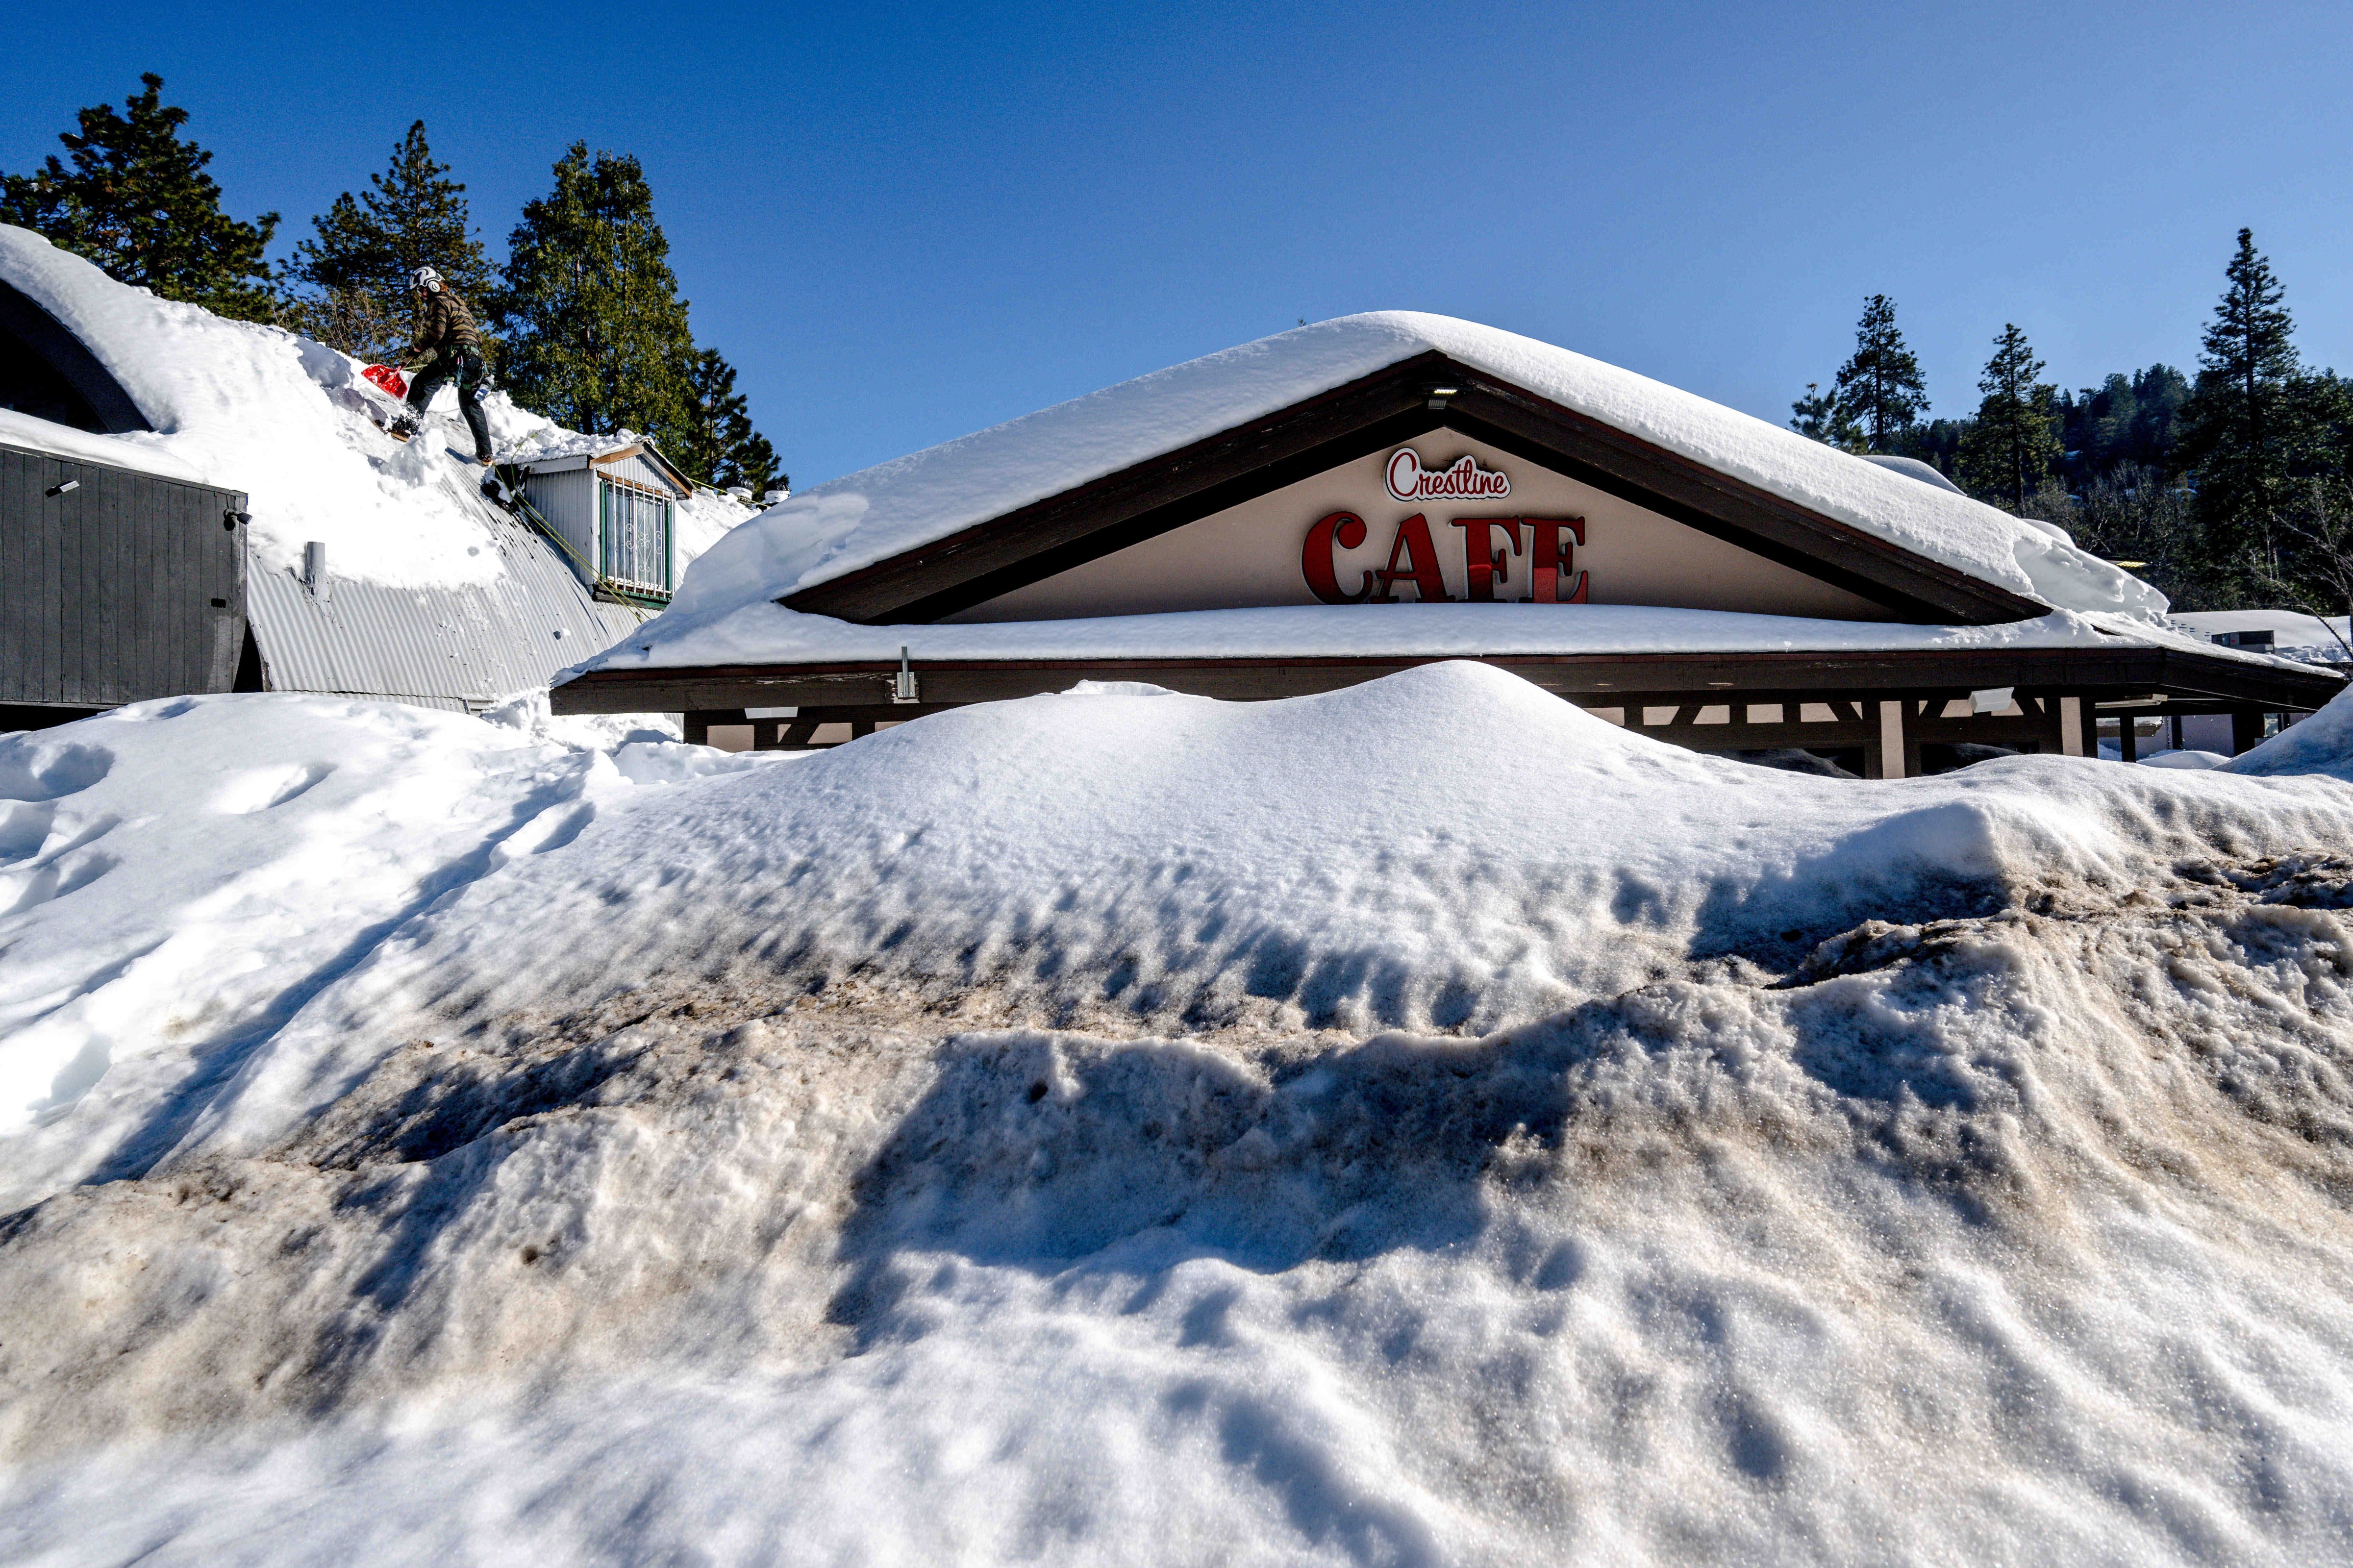 A man shovels snow off the roof of a store in Crestline on Friday, March 3, 2023, as buildings remain buried in several feet of snow from recent winter storms. (Watchara Phomicinda–MediaNews Group/The Press-Enterprise/Getty Images)